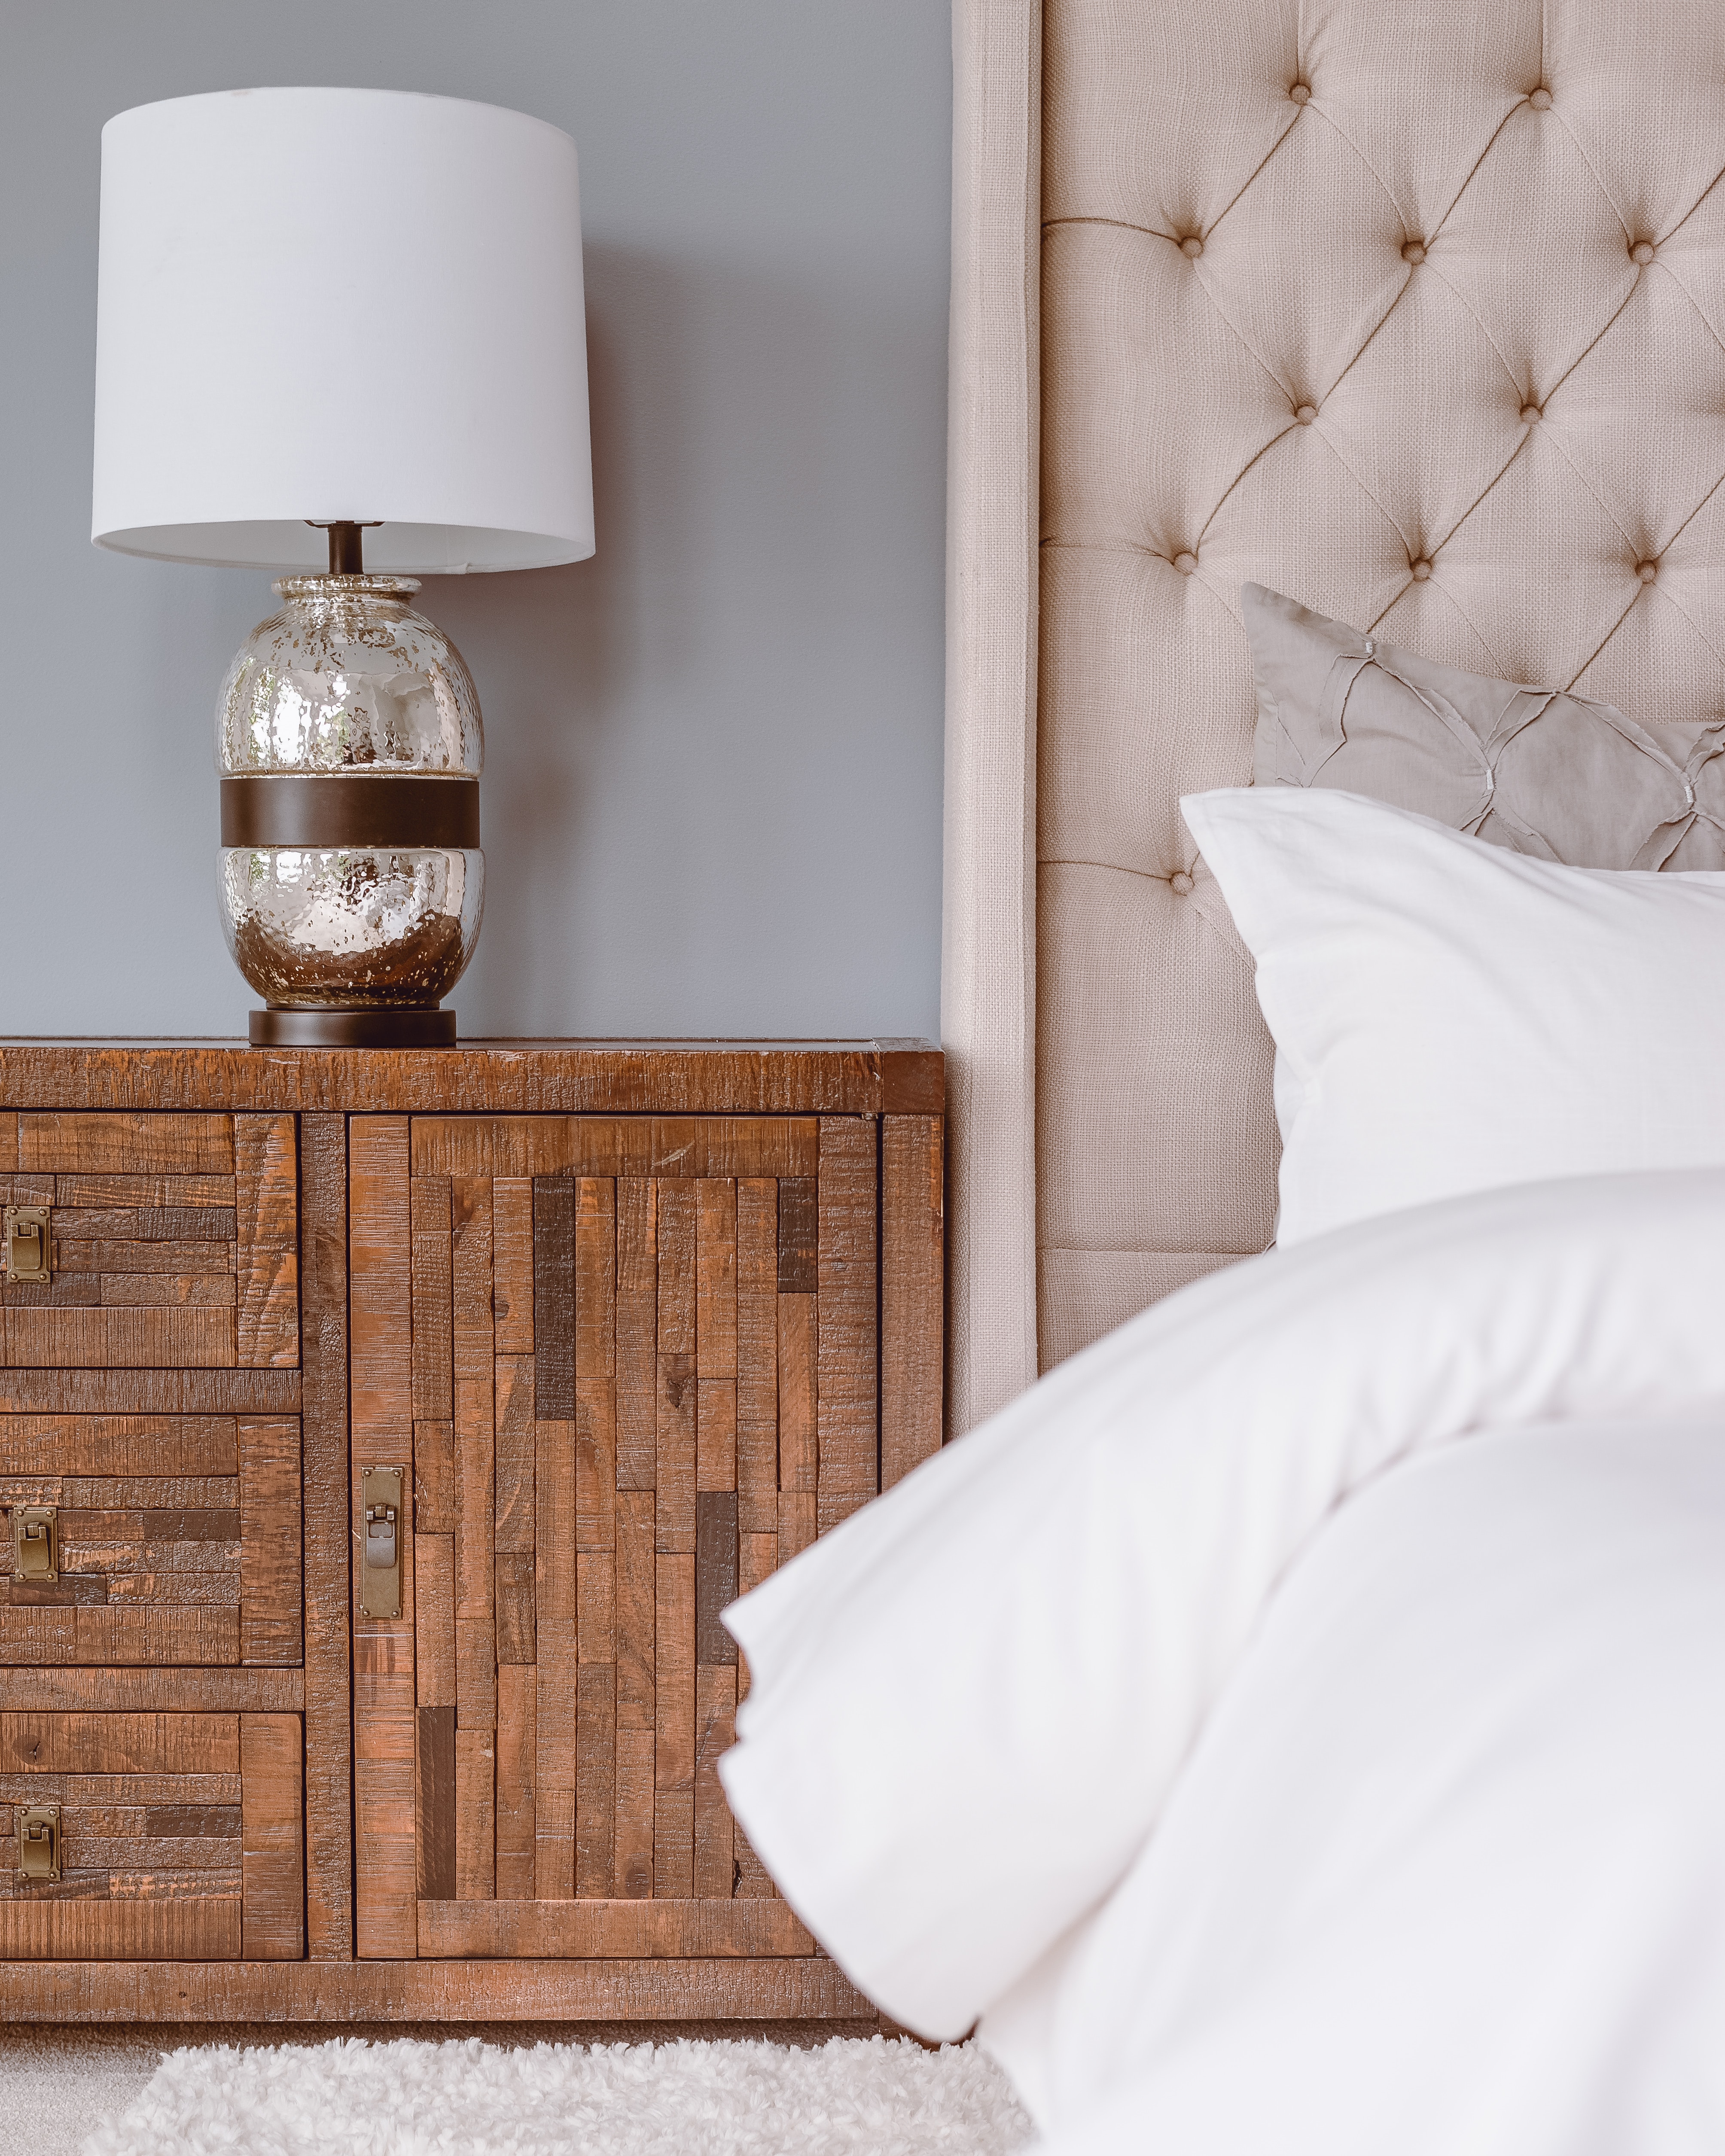 A bed with white linens and an upholstered headboard with a warm wood side table and metallic lamp